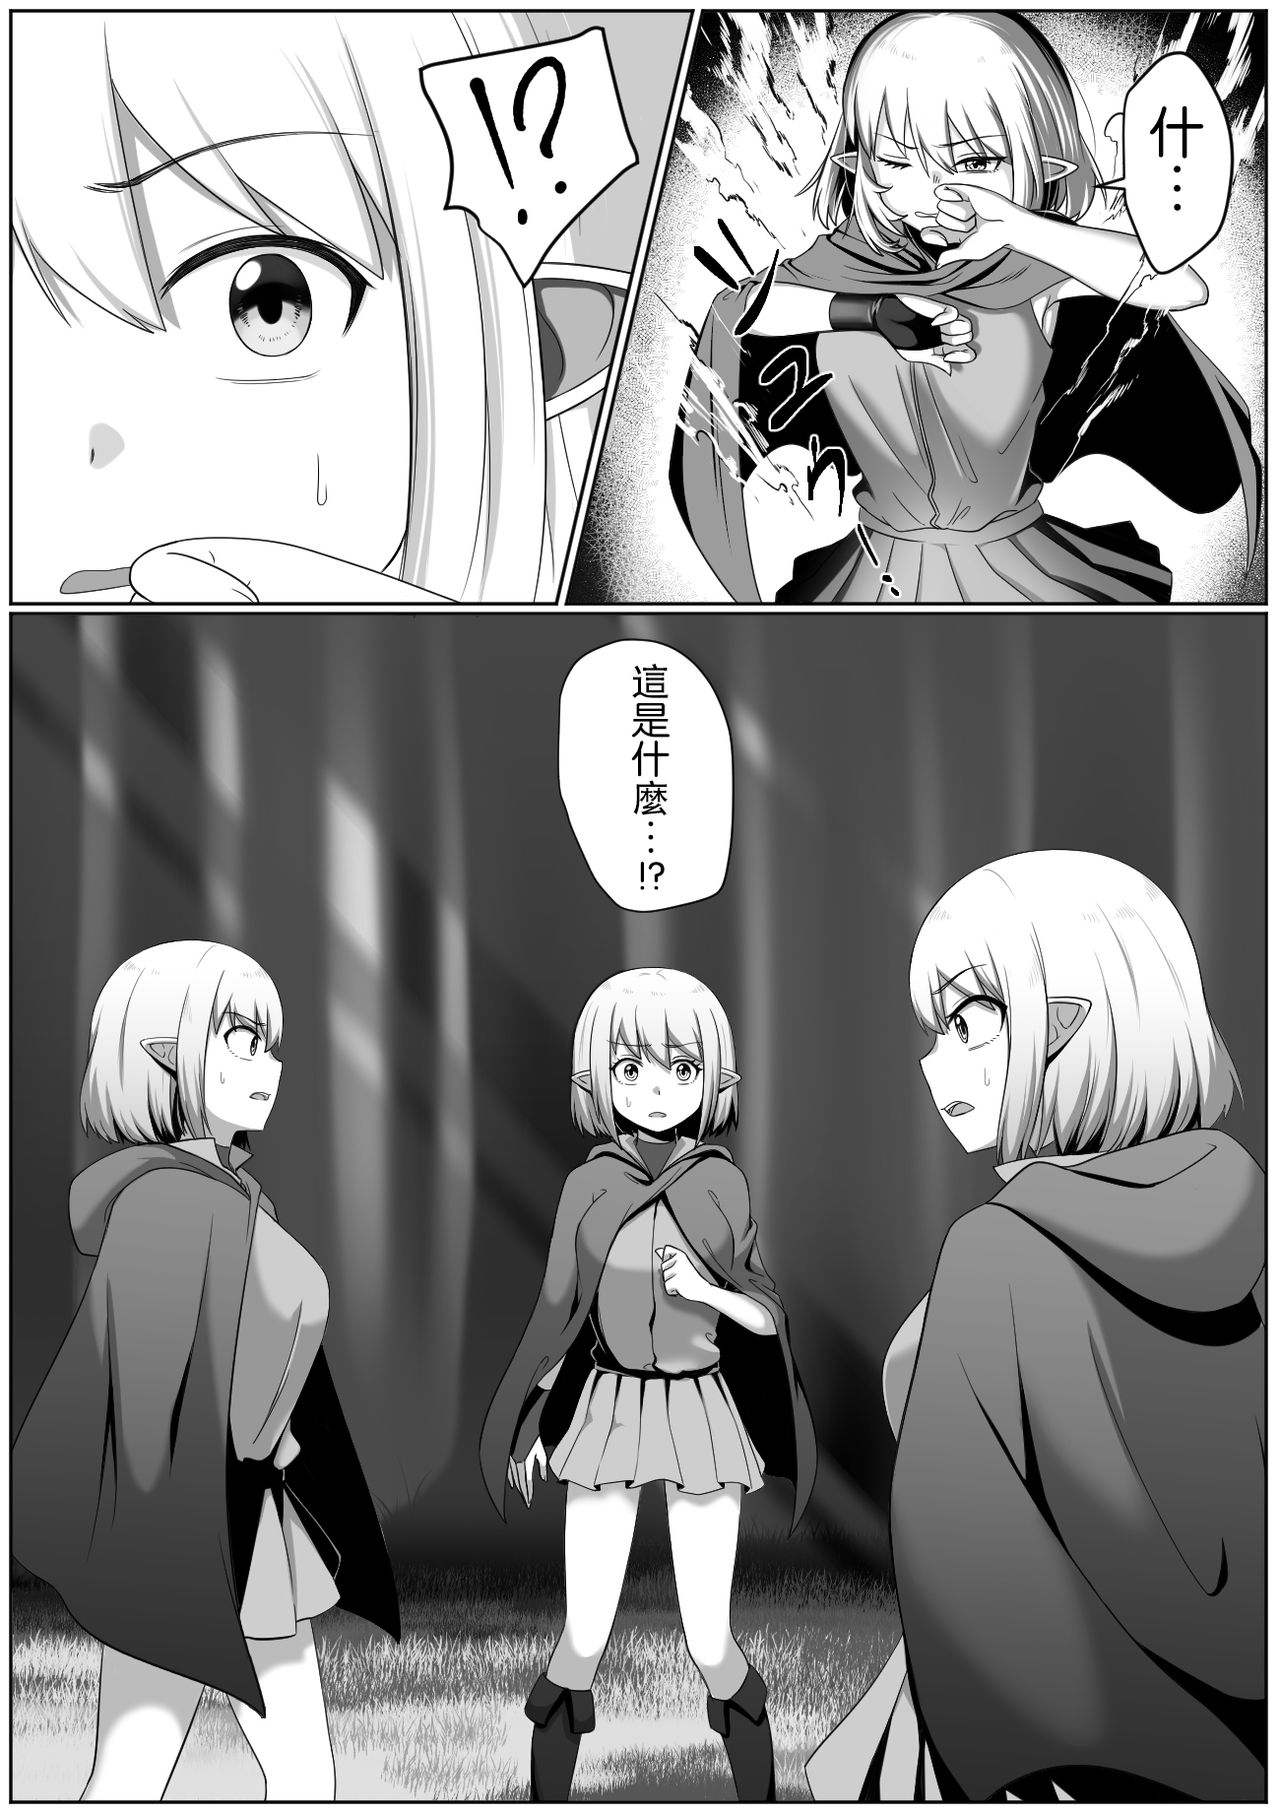 [Doukyara Doukoukai] Selfcest in the forest  [Chinese] [沒有漢化] [同キャラ同好会] Selfcest in the forest [中国翻訳]